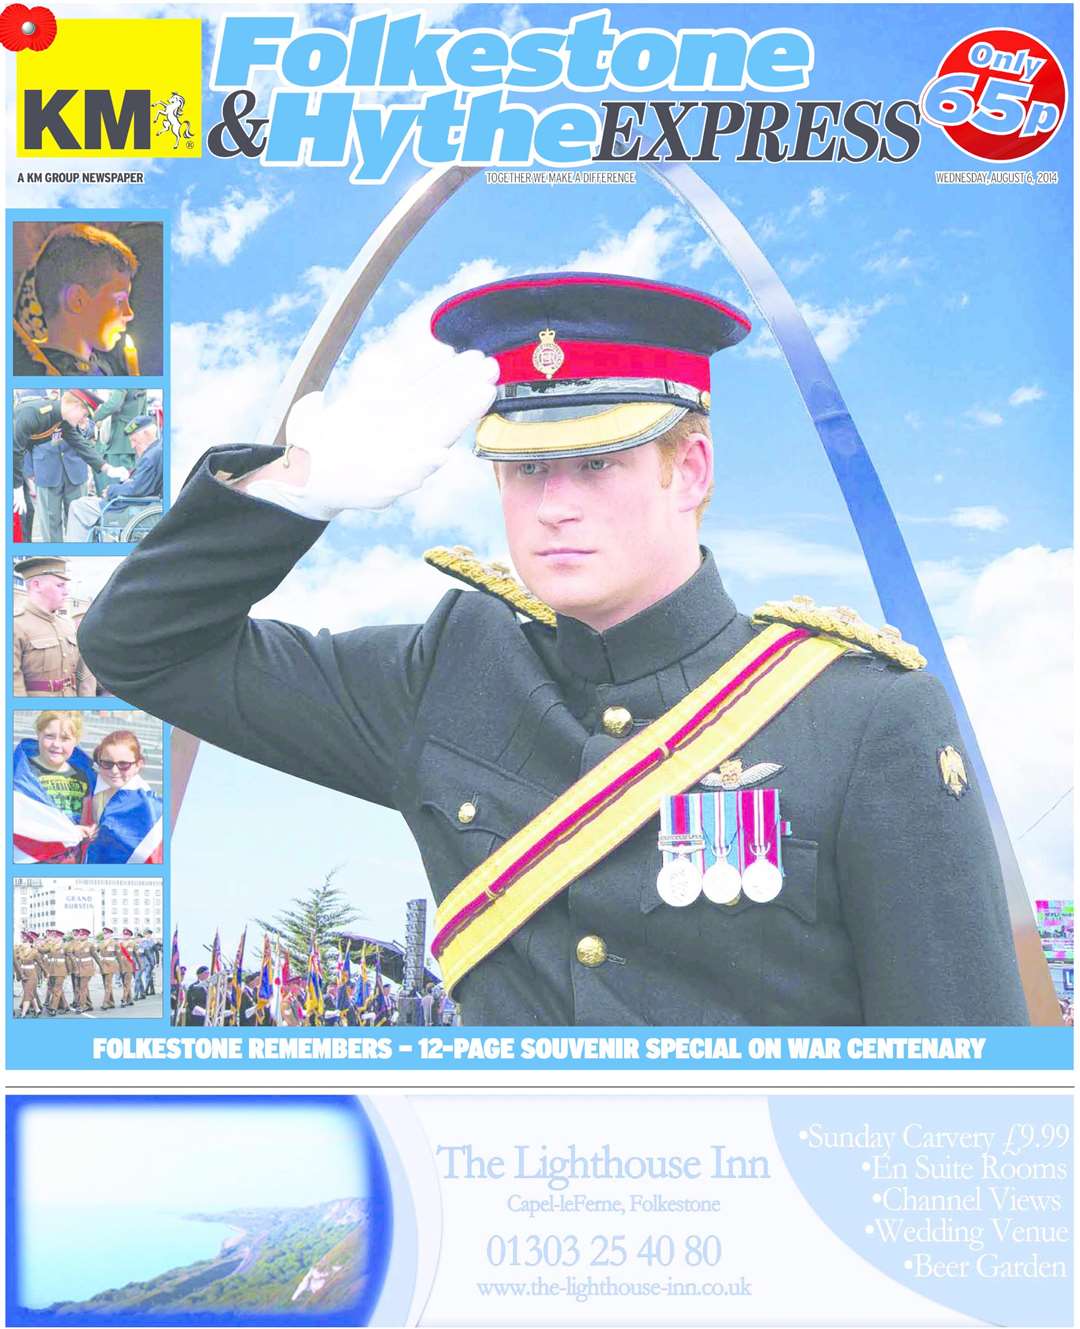 Prince Harry comes to Folkestone and features on the August 6 2014 front page